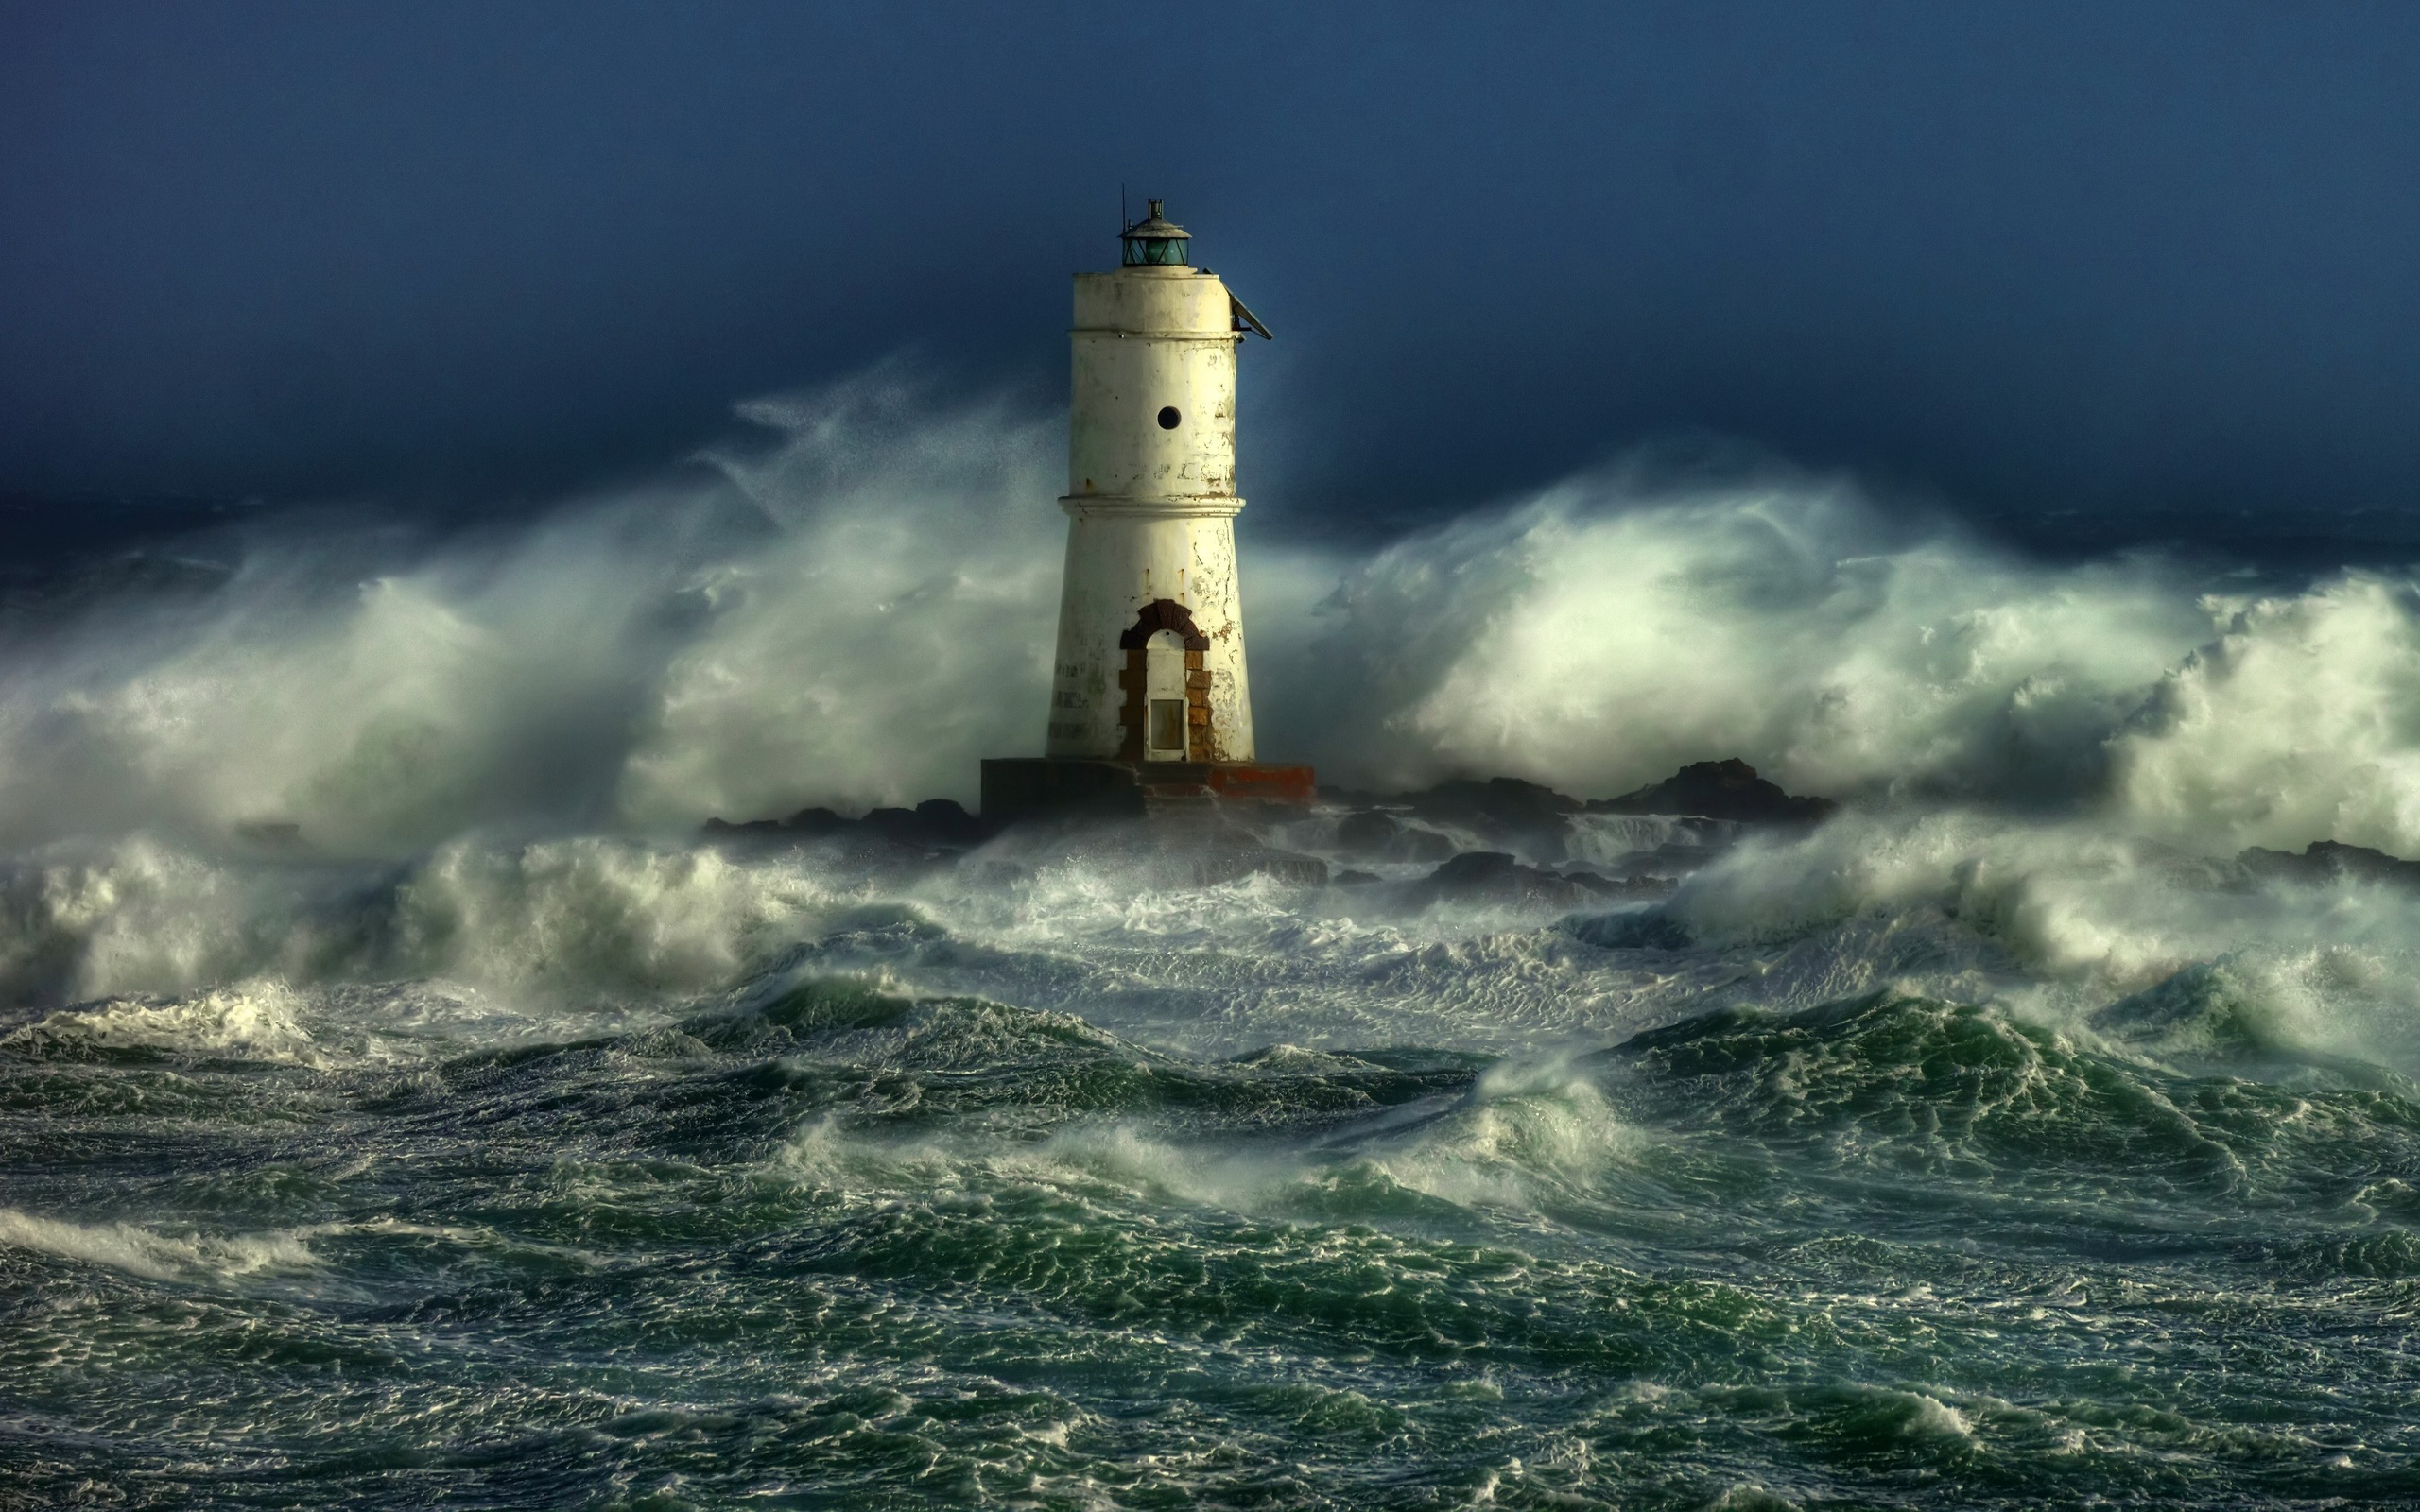 ... Lighthouse in the storm ...